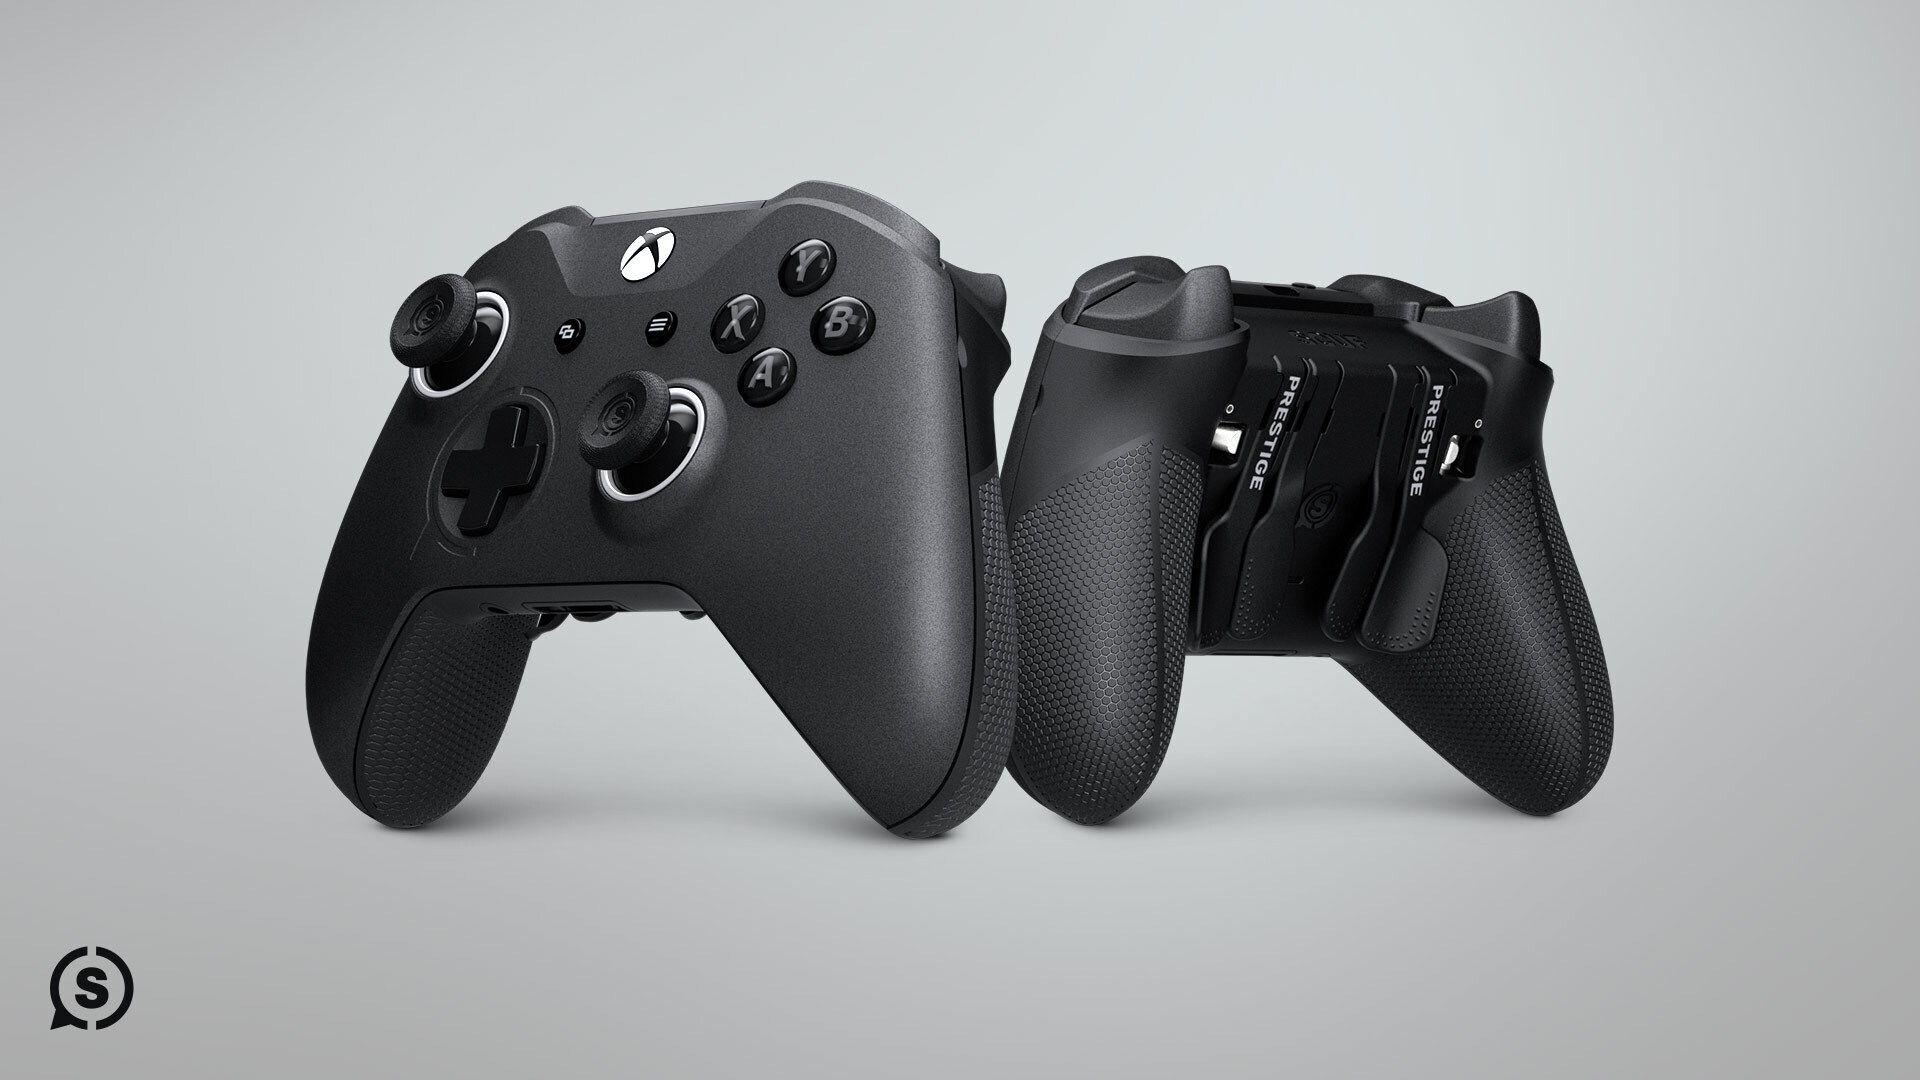 xbox controller and ps5 controller